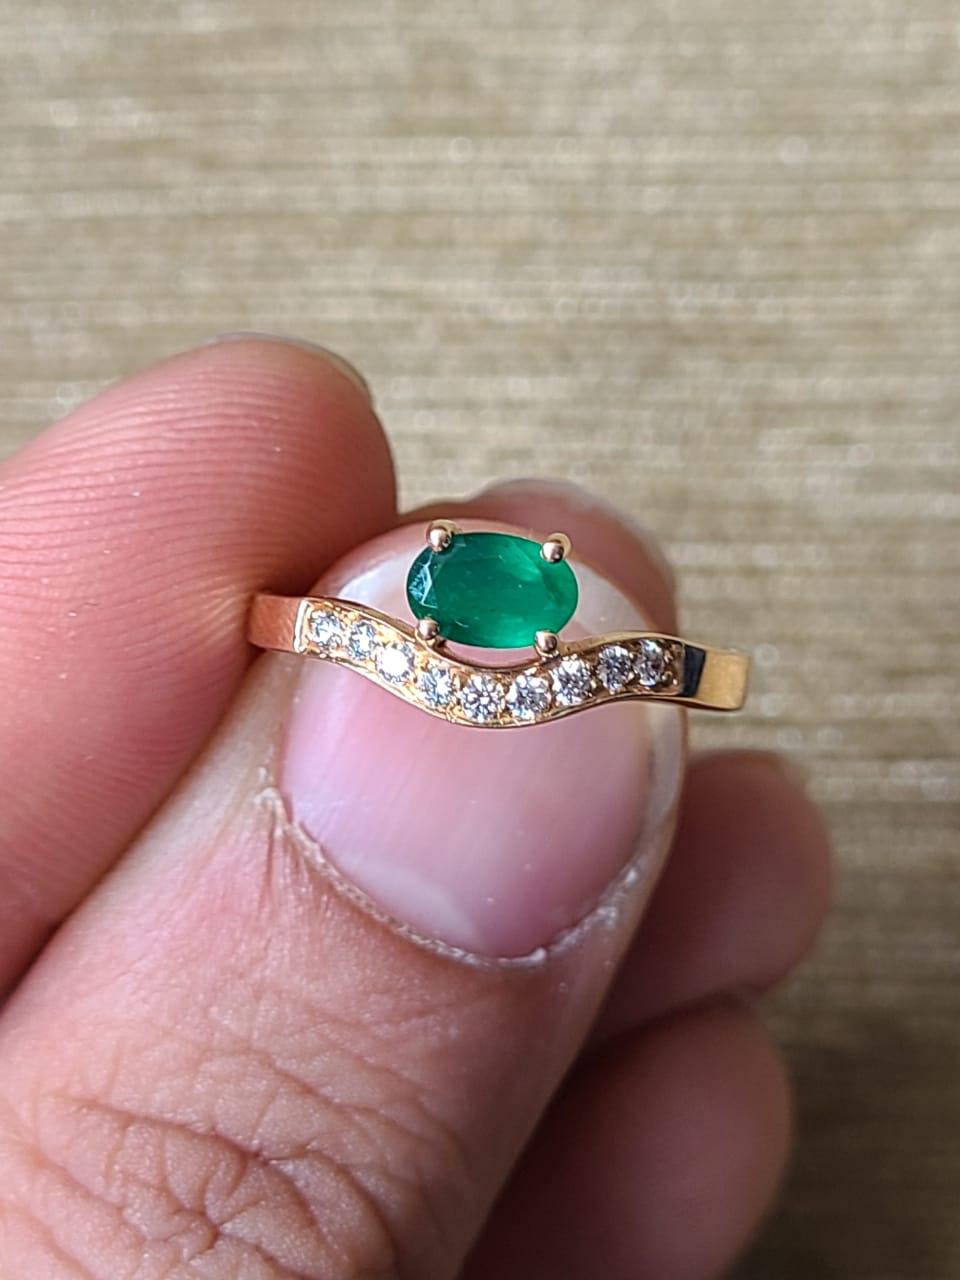 Oval Cut Natural Zambian Emerald & Diamonds Engagement / Wedding Ring Set in 18K Gold For Sale